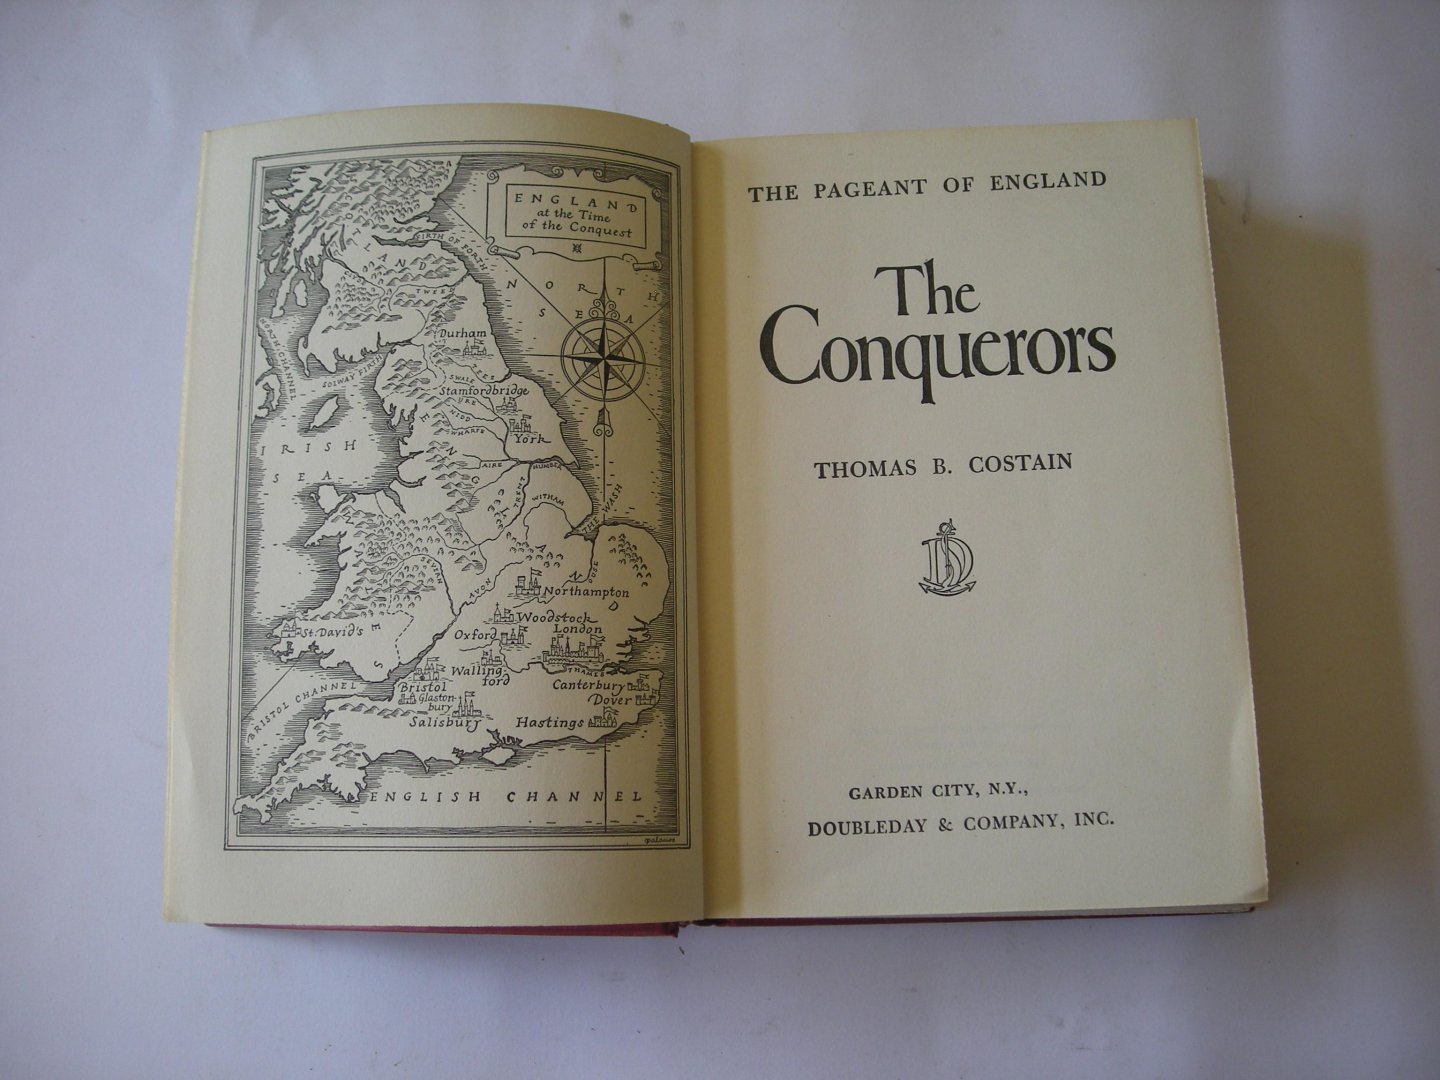 Costain, Thomas B. - The Conquerors. The Pageant of England